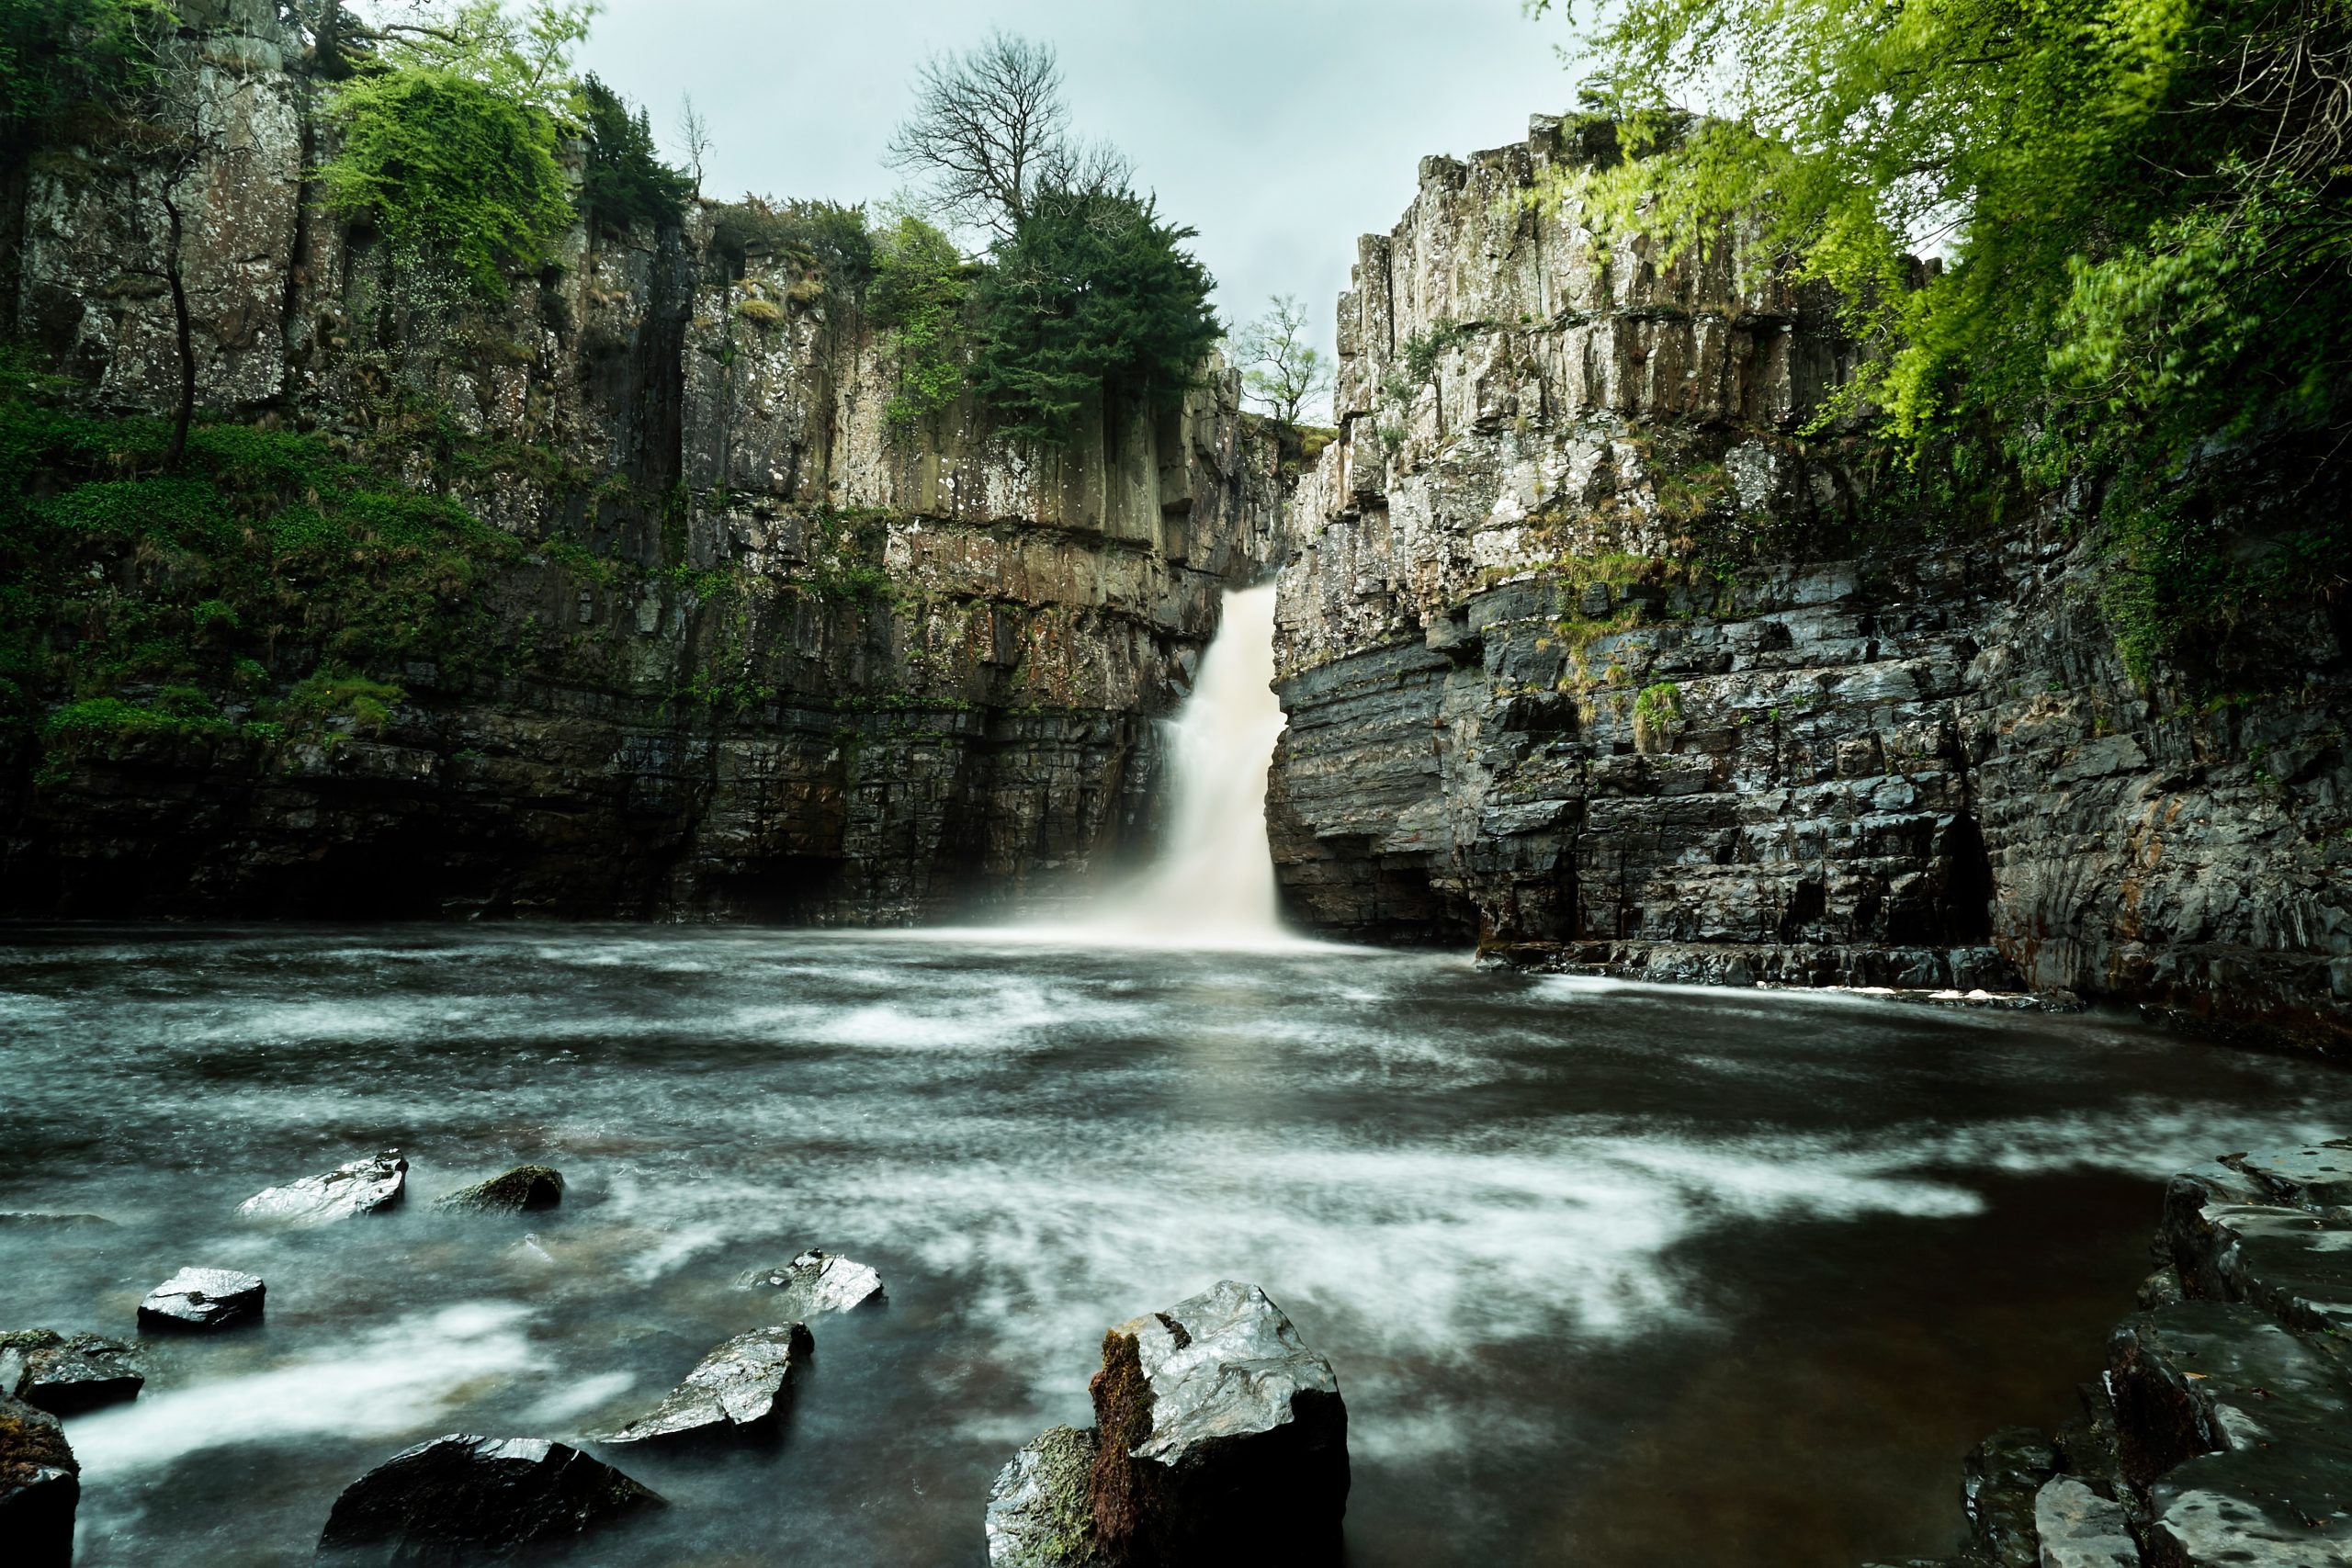 View of the High Force Waterfall near Durham forest in Teesdale